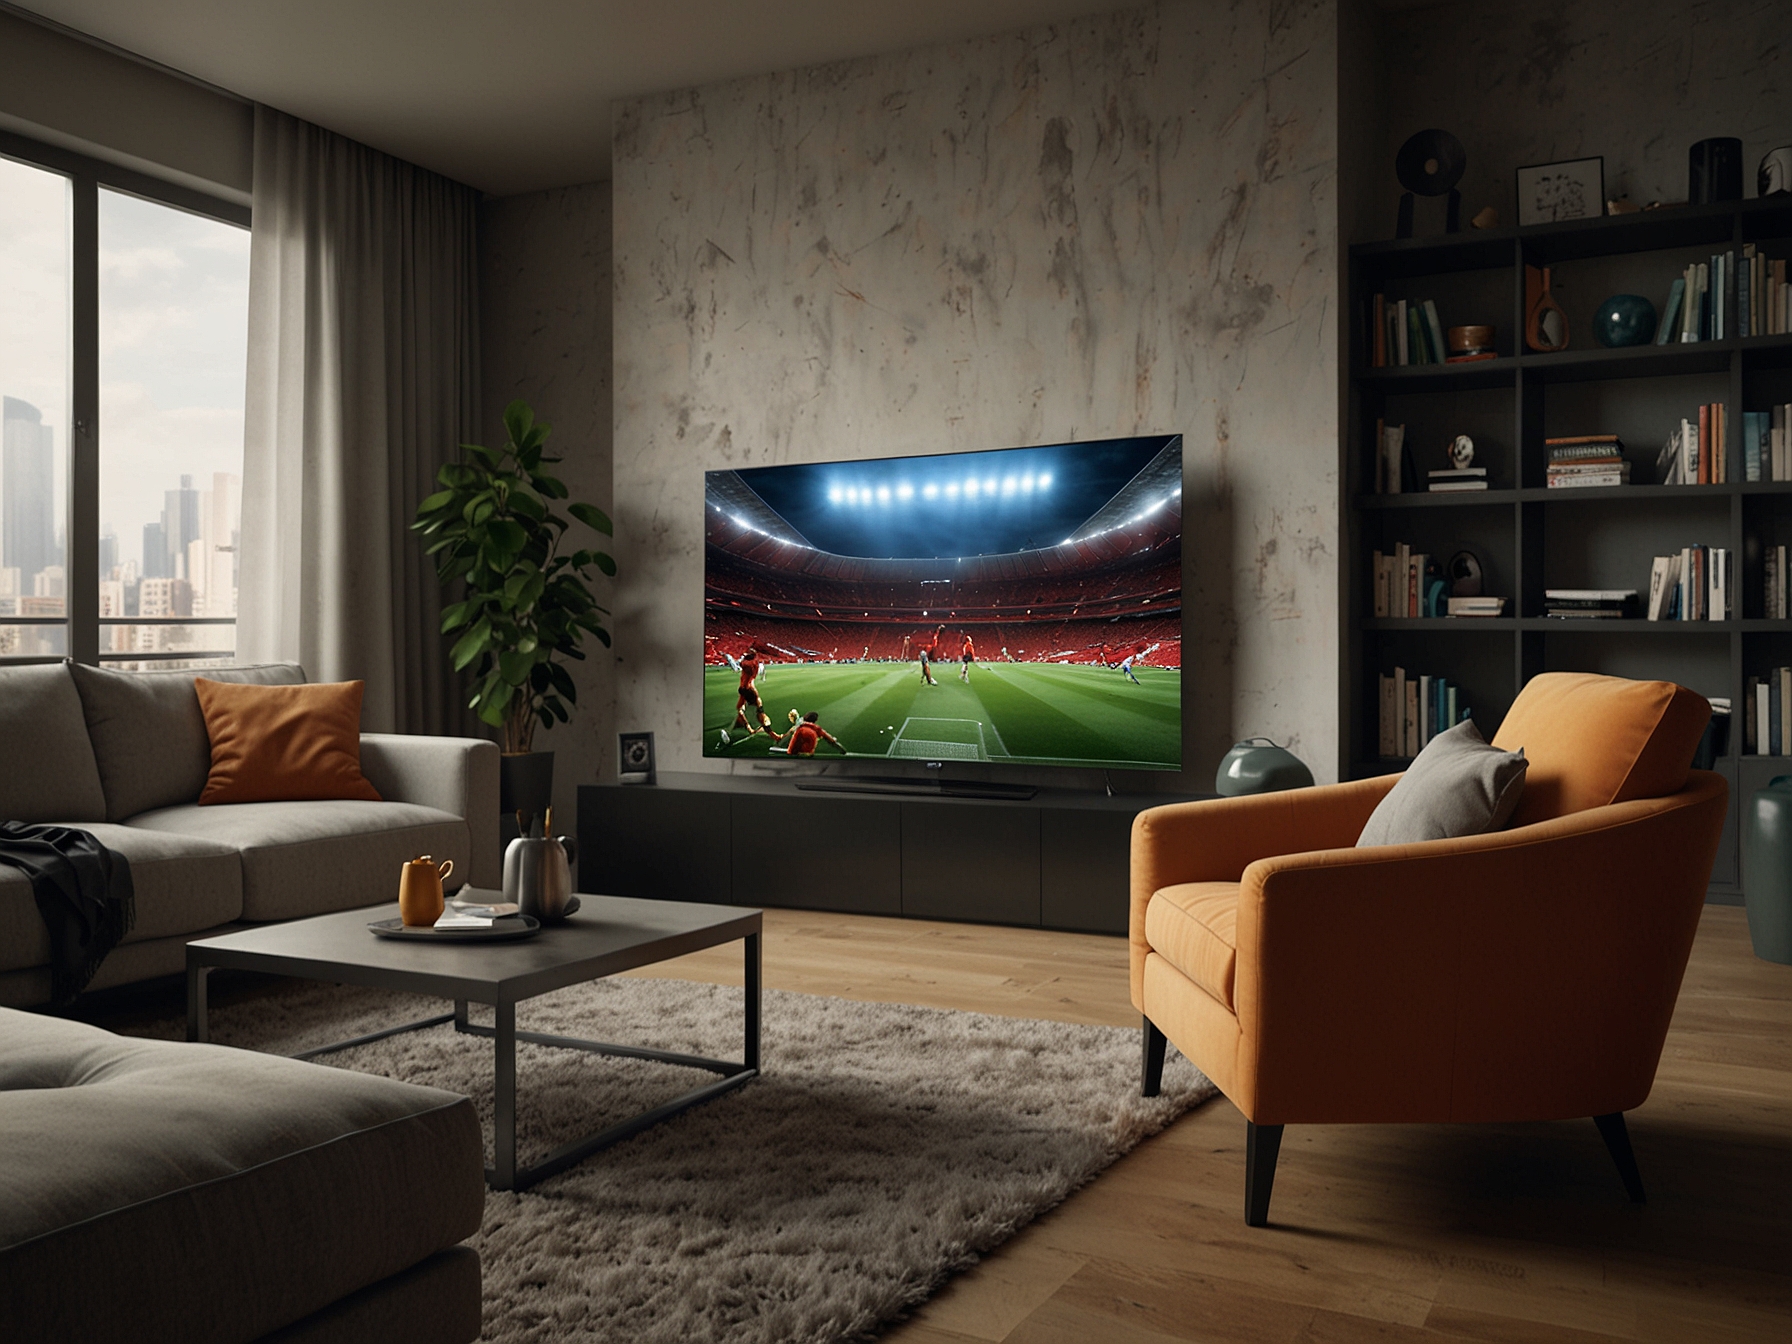 A living room setting featuring the sleek Toshiba Gaming TV Z670 with Dolby Atmos sound, enhancing the immersive experience of watching UEFA EURO 2024TM matches, making viewers feel as if they're in the stadium.